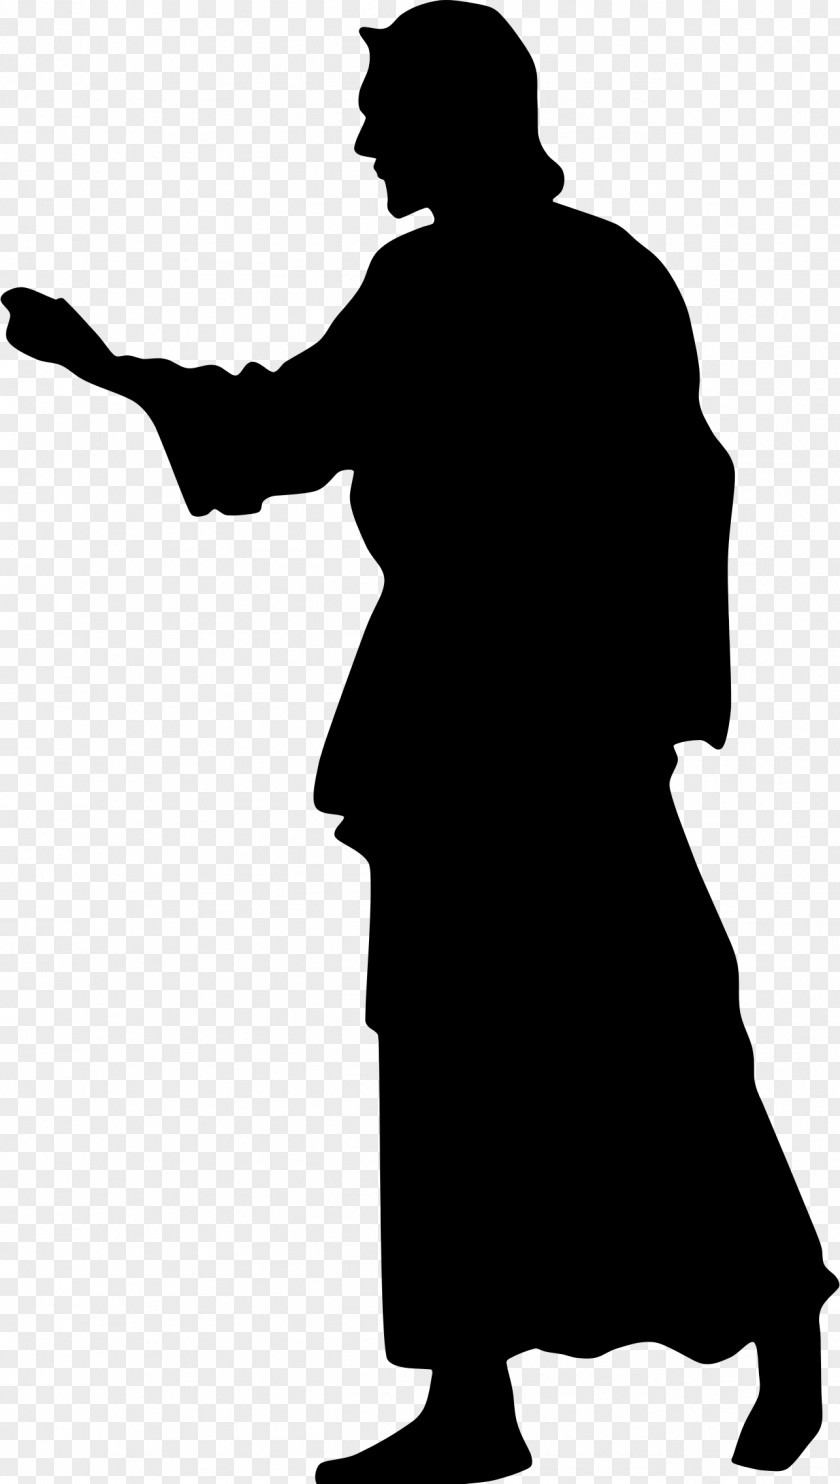 Jesus Christ Silhouette Crucifixion Of Clip Art PNG